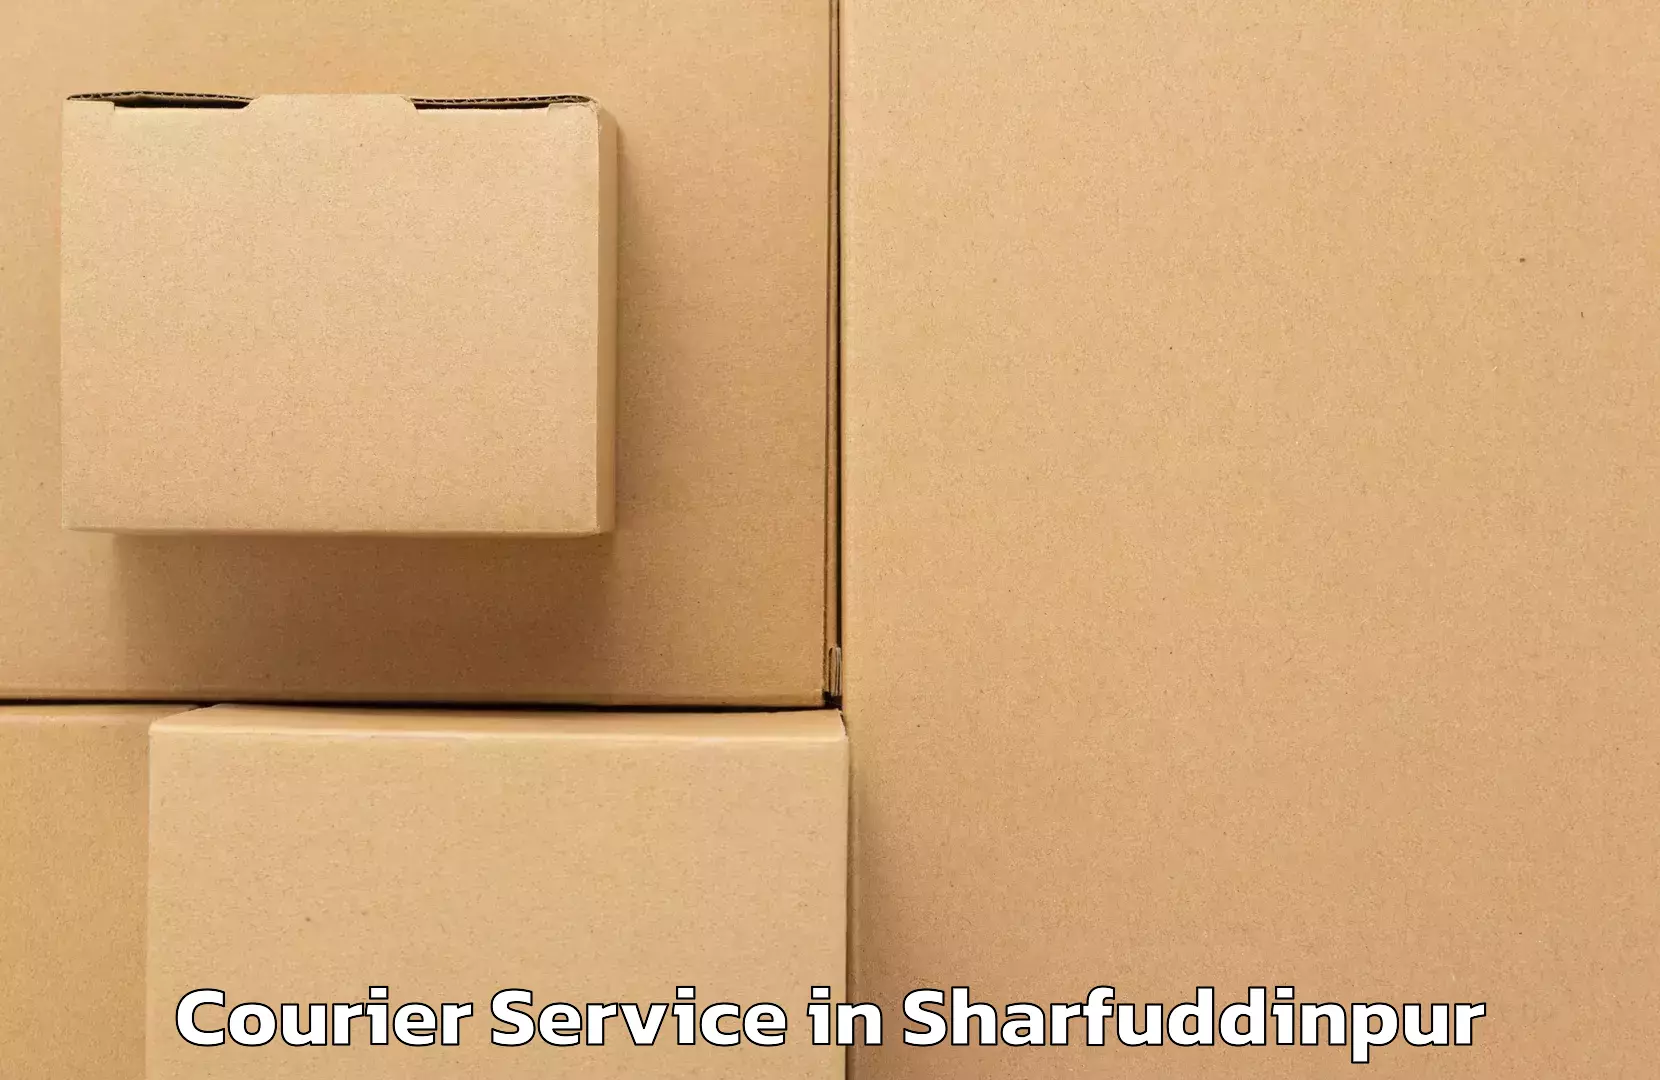 Specialized shipment handling in Sharfuddinpur